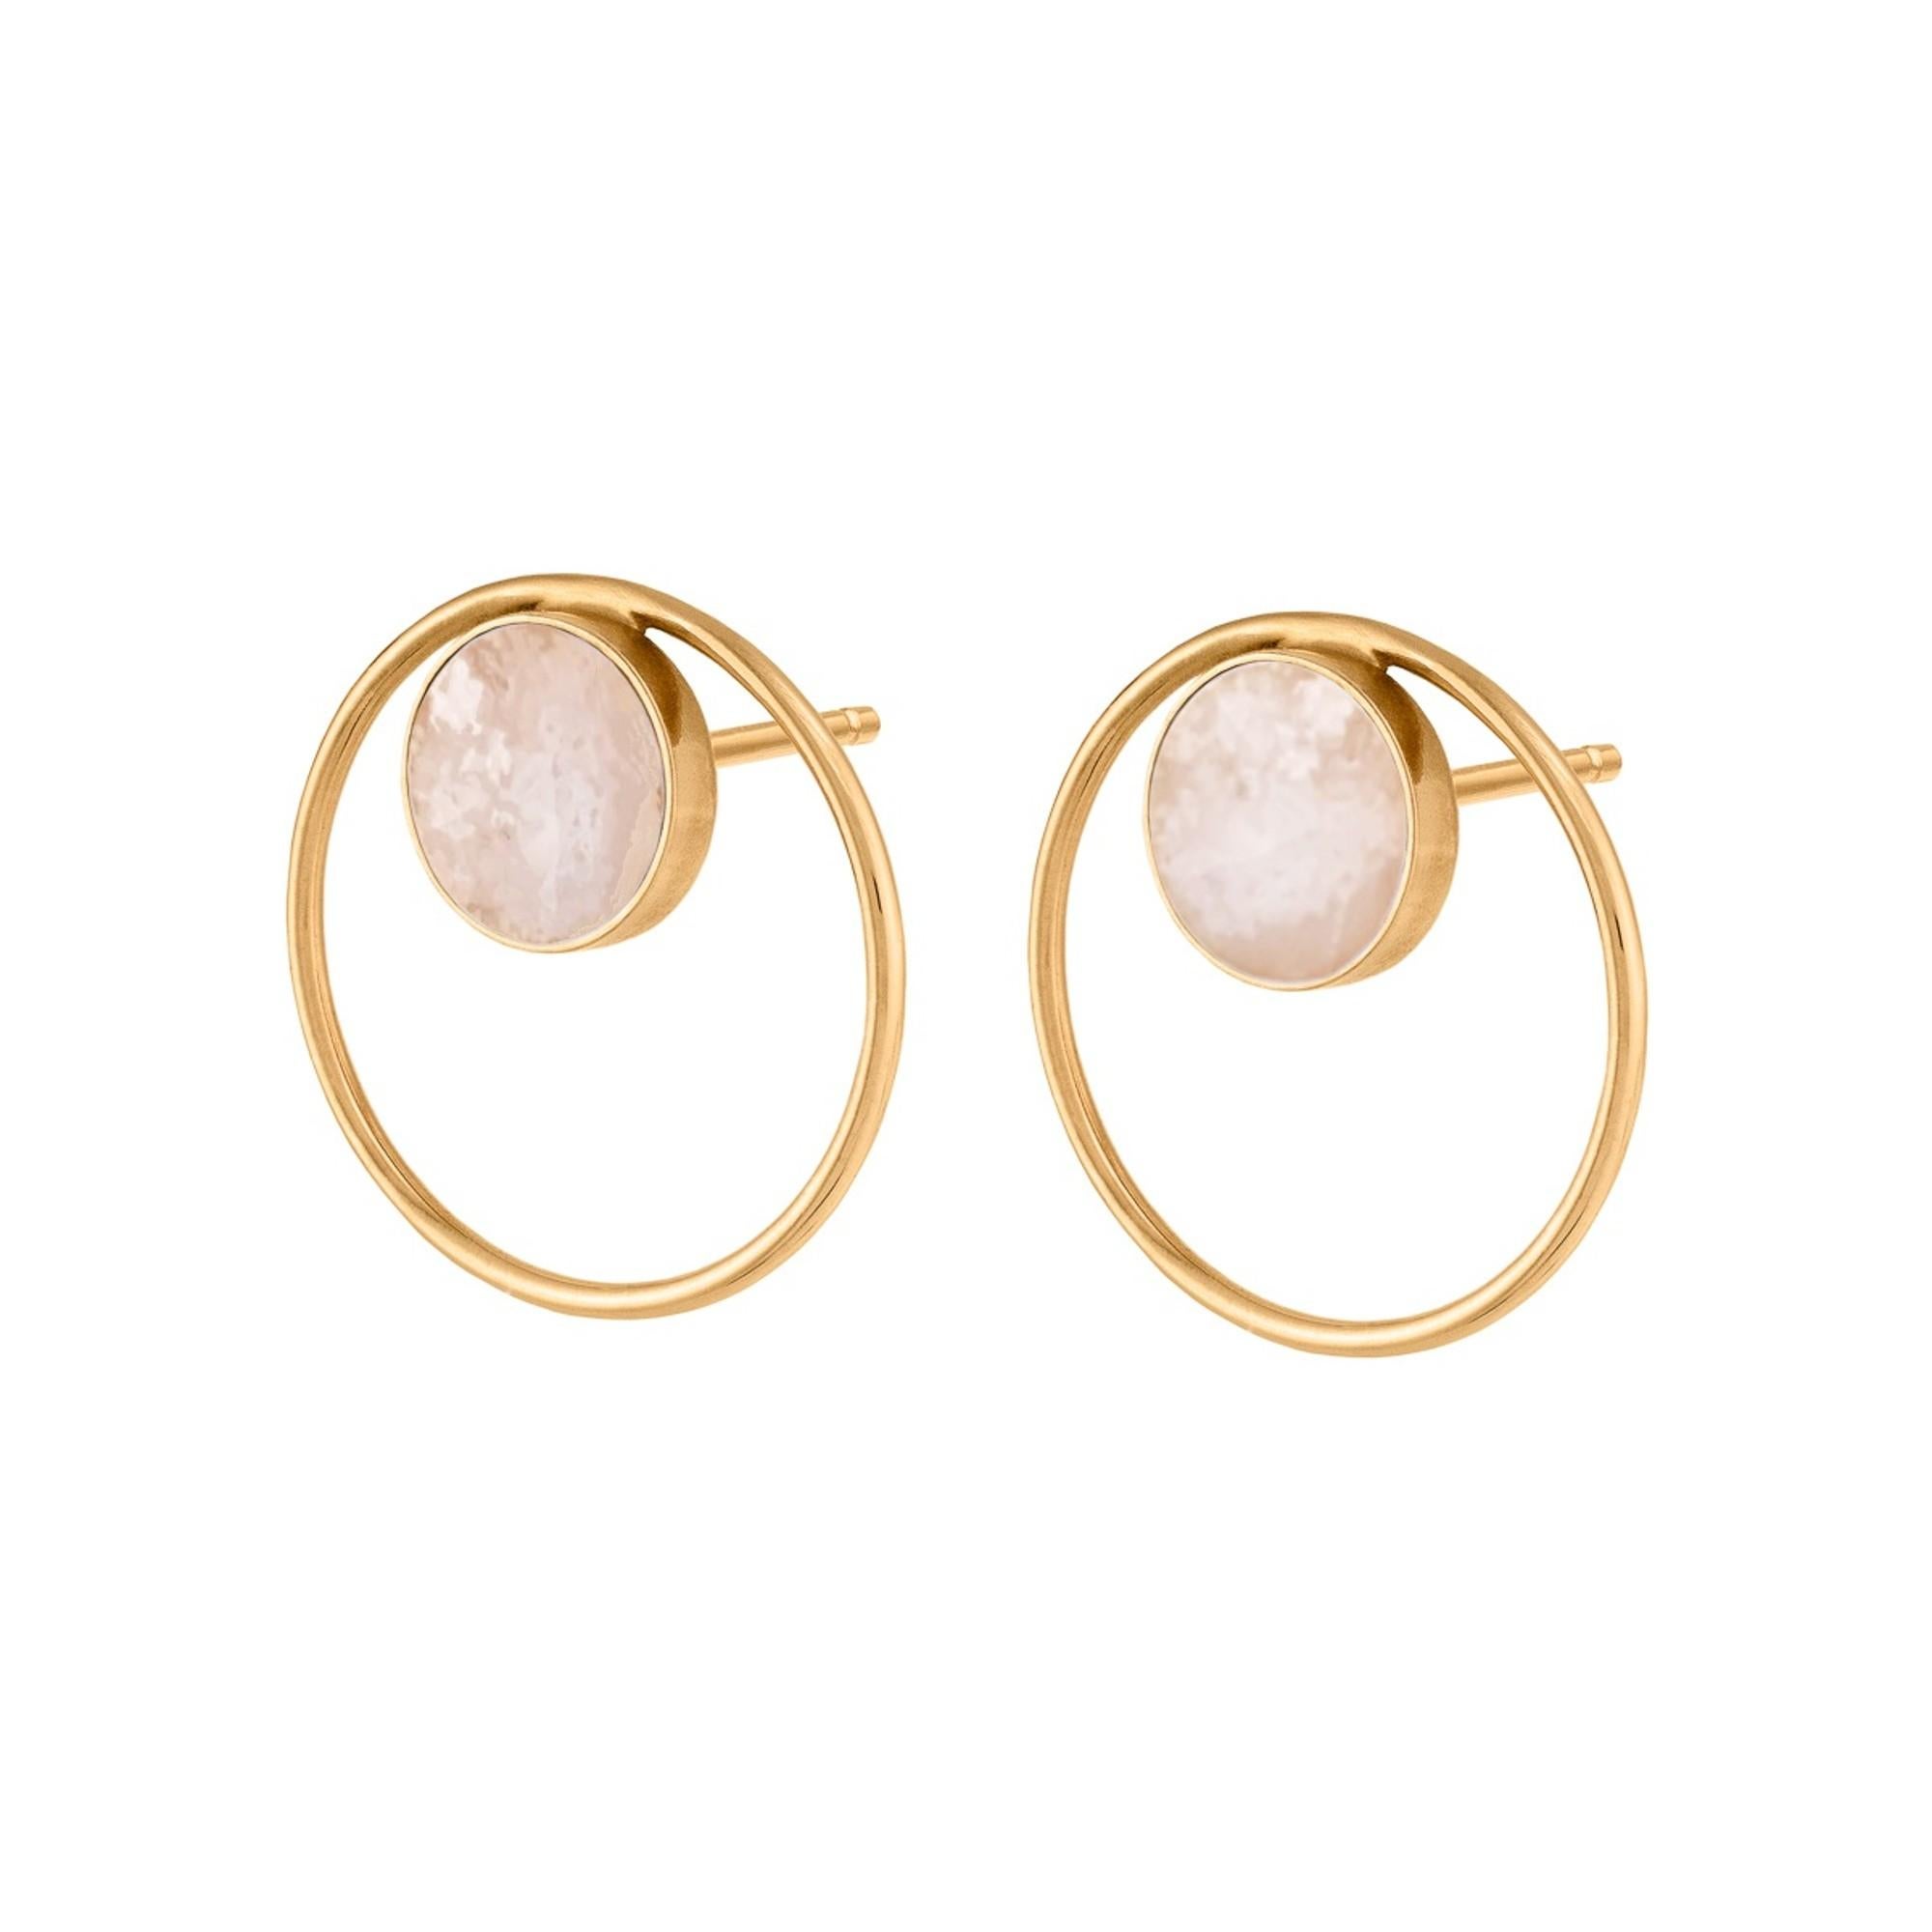 The earrings with white stone are part of a collection whose leitmotif is the perfection of the circle shape. It symbolises completeness, harmony and femininity. Add an extra touch to your look with these simple yet extraordinary earrings. Even a